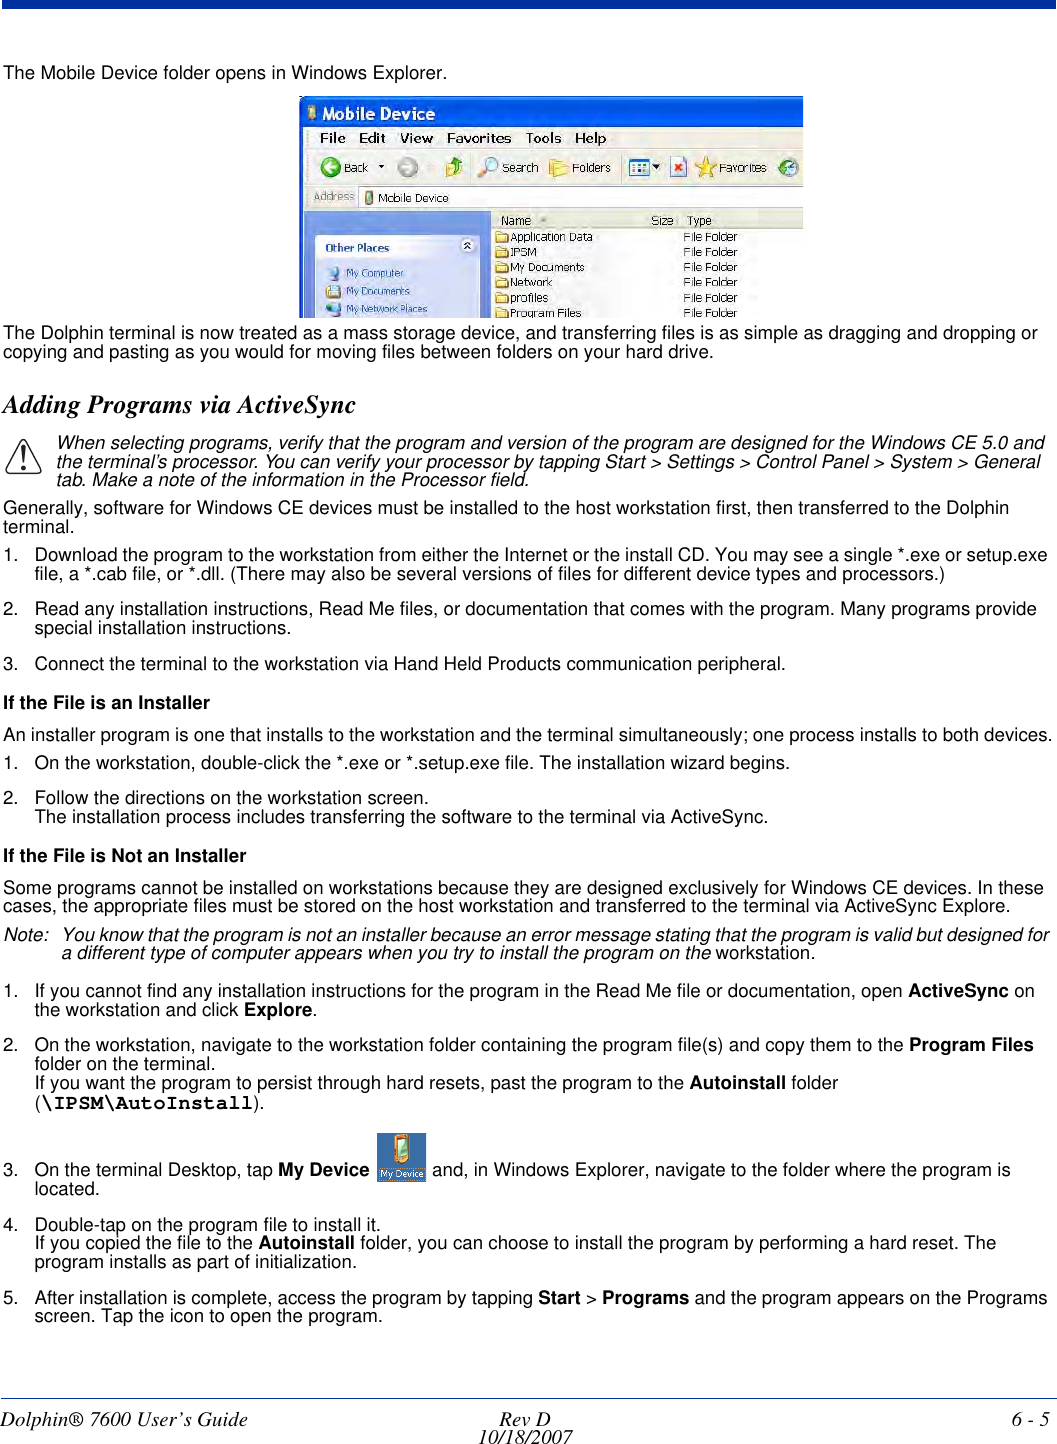 Dolphin® 7600 User’s Guide  Rev D10/18/2007 6 - 5The Mobile Device folder opens in Windows Explorer. The Dolphin terminal is now treated as a mass storage device, and transferring files is as simple as dragging and dropping or copying and pasting as you would for moving files between folders on your hard drive.Adding Programs via ActiveSyncWhen selecting programs, verify that the program and version of the program are designed for the Windows CE 5.0 and the terminal’s processor. You can verify your processor by tapping Start &gt; Settings &gt; Control Panel &gt; System &gt; General tab. Make a note of the information in the Processor field. Generally, software for Windows CE devices must be installed to the host workstation first, then transferred to the Dolphin terminal. 1. Download the program to the workstation from either the Internet or the install CD. You may see a single *.exe or setup.exe file, a *.cab file, or *.dll. (There may also be several versions of files for different device types and processors.)2. Read any installation instructions, Read Me files, or documentation that comes with the program. Many programs provide special installation instructions.3. Connect the terminal to the workstation via Hand Held Products communication peripheral.If the File is an InstallerAn installer program is one that installs to the workstation and the terminal simultaneously; one process installs to both devices.1. On the workstation, double-click the *.exe or *.setup.exe file. The installation wizard begins. 2. Follow the directions on the workstation screen. The installation process includes transferring the software to the terminal via ActiveSync. If the File is Not an InstallerSome programs cannot be installed on workstations because they are designed exclusively for Windows CE devices. In these cases, the appropriate files must be stored on the host workstation and transferred to the terminal via ActiveSync Explore. Note: You know that the program is not an installer because an error message stating that the program is valid but designed for a different type of computer appears when you try to install the program on the workstation. 1. If you cannot find any installation instructions for the program in the Read Me file or documentation, open ActiveSync on the workstation and click Explore.2. On the workstation, navigate to the workstation folder containing the program file(s) and copy them to the Program Files folder on the terminal. If you want the program to persist through hard resets, past the program to the Autoinstall folder (\IPSM\AutoInstall).3. On the terminal Desktop, tap My Device   and, in Windows Explorer, navigate to the folder where the program is located.4. Double-tap on the program file to install it.If you copied the file to the Autoinstall folder, you can choose to install the program by performing a hard reset. The program installs as part of initialization. 5. After installation is complete, access the program by tapping Start &gt; Programs and the program appears on the Programs screen. Tap the icon to open the program.!